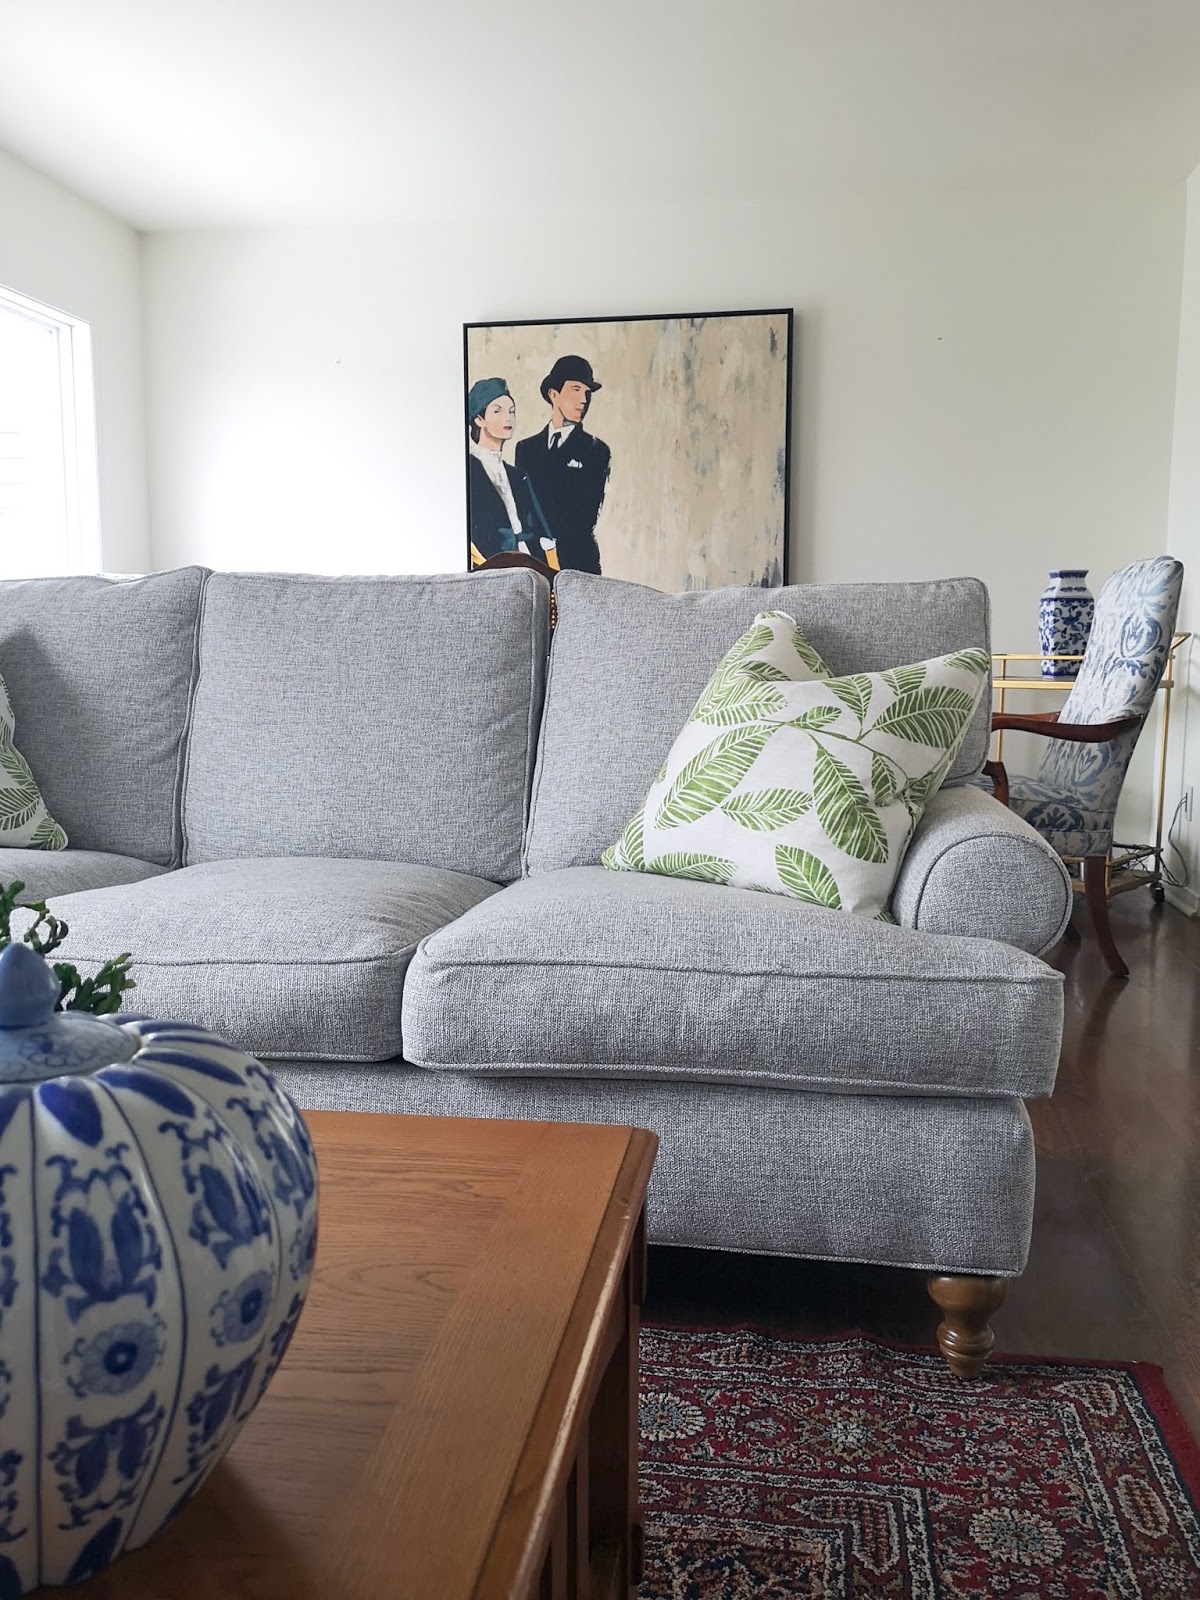 5 Tips To Take The Stress Out Of Buying A Sofa Or Any Other Large